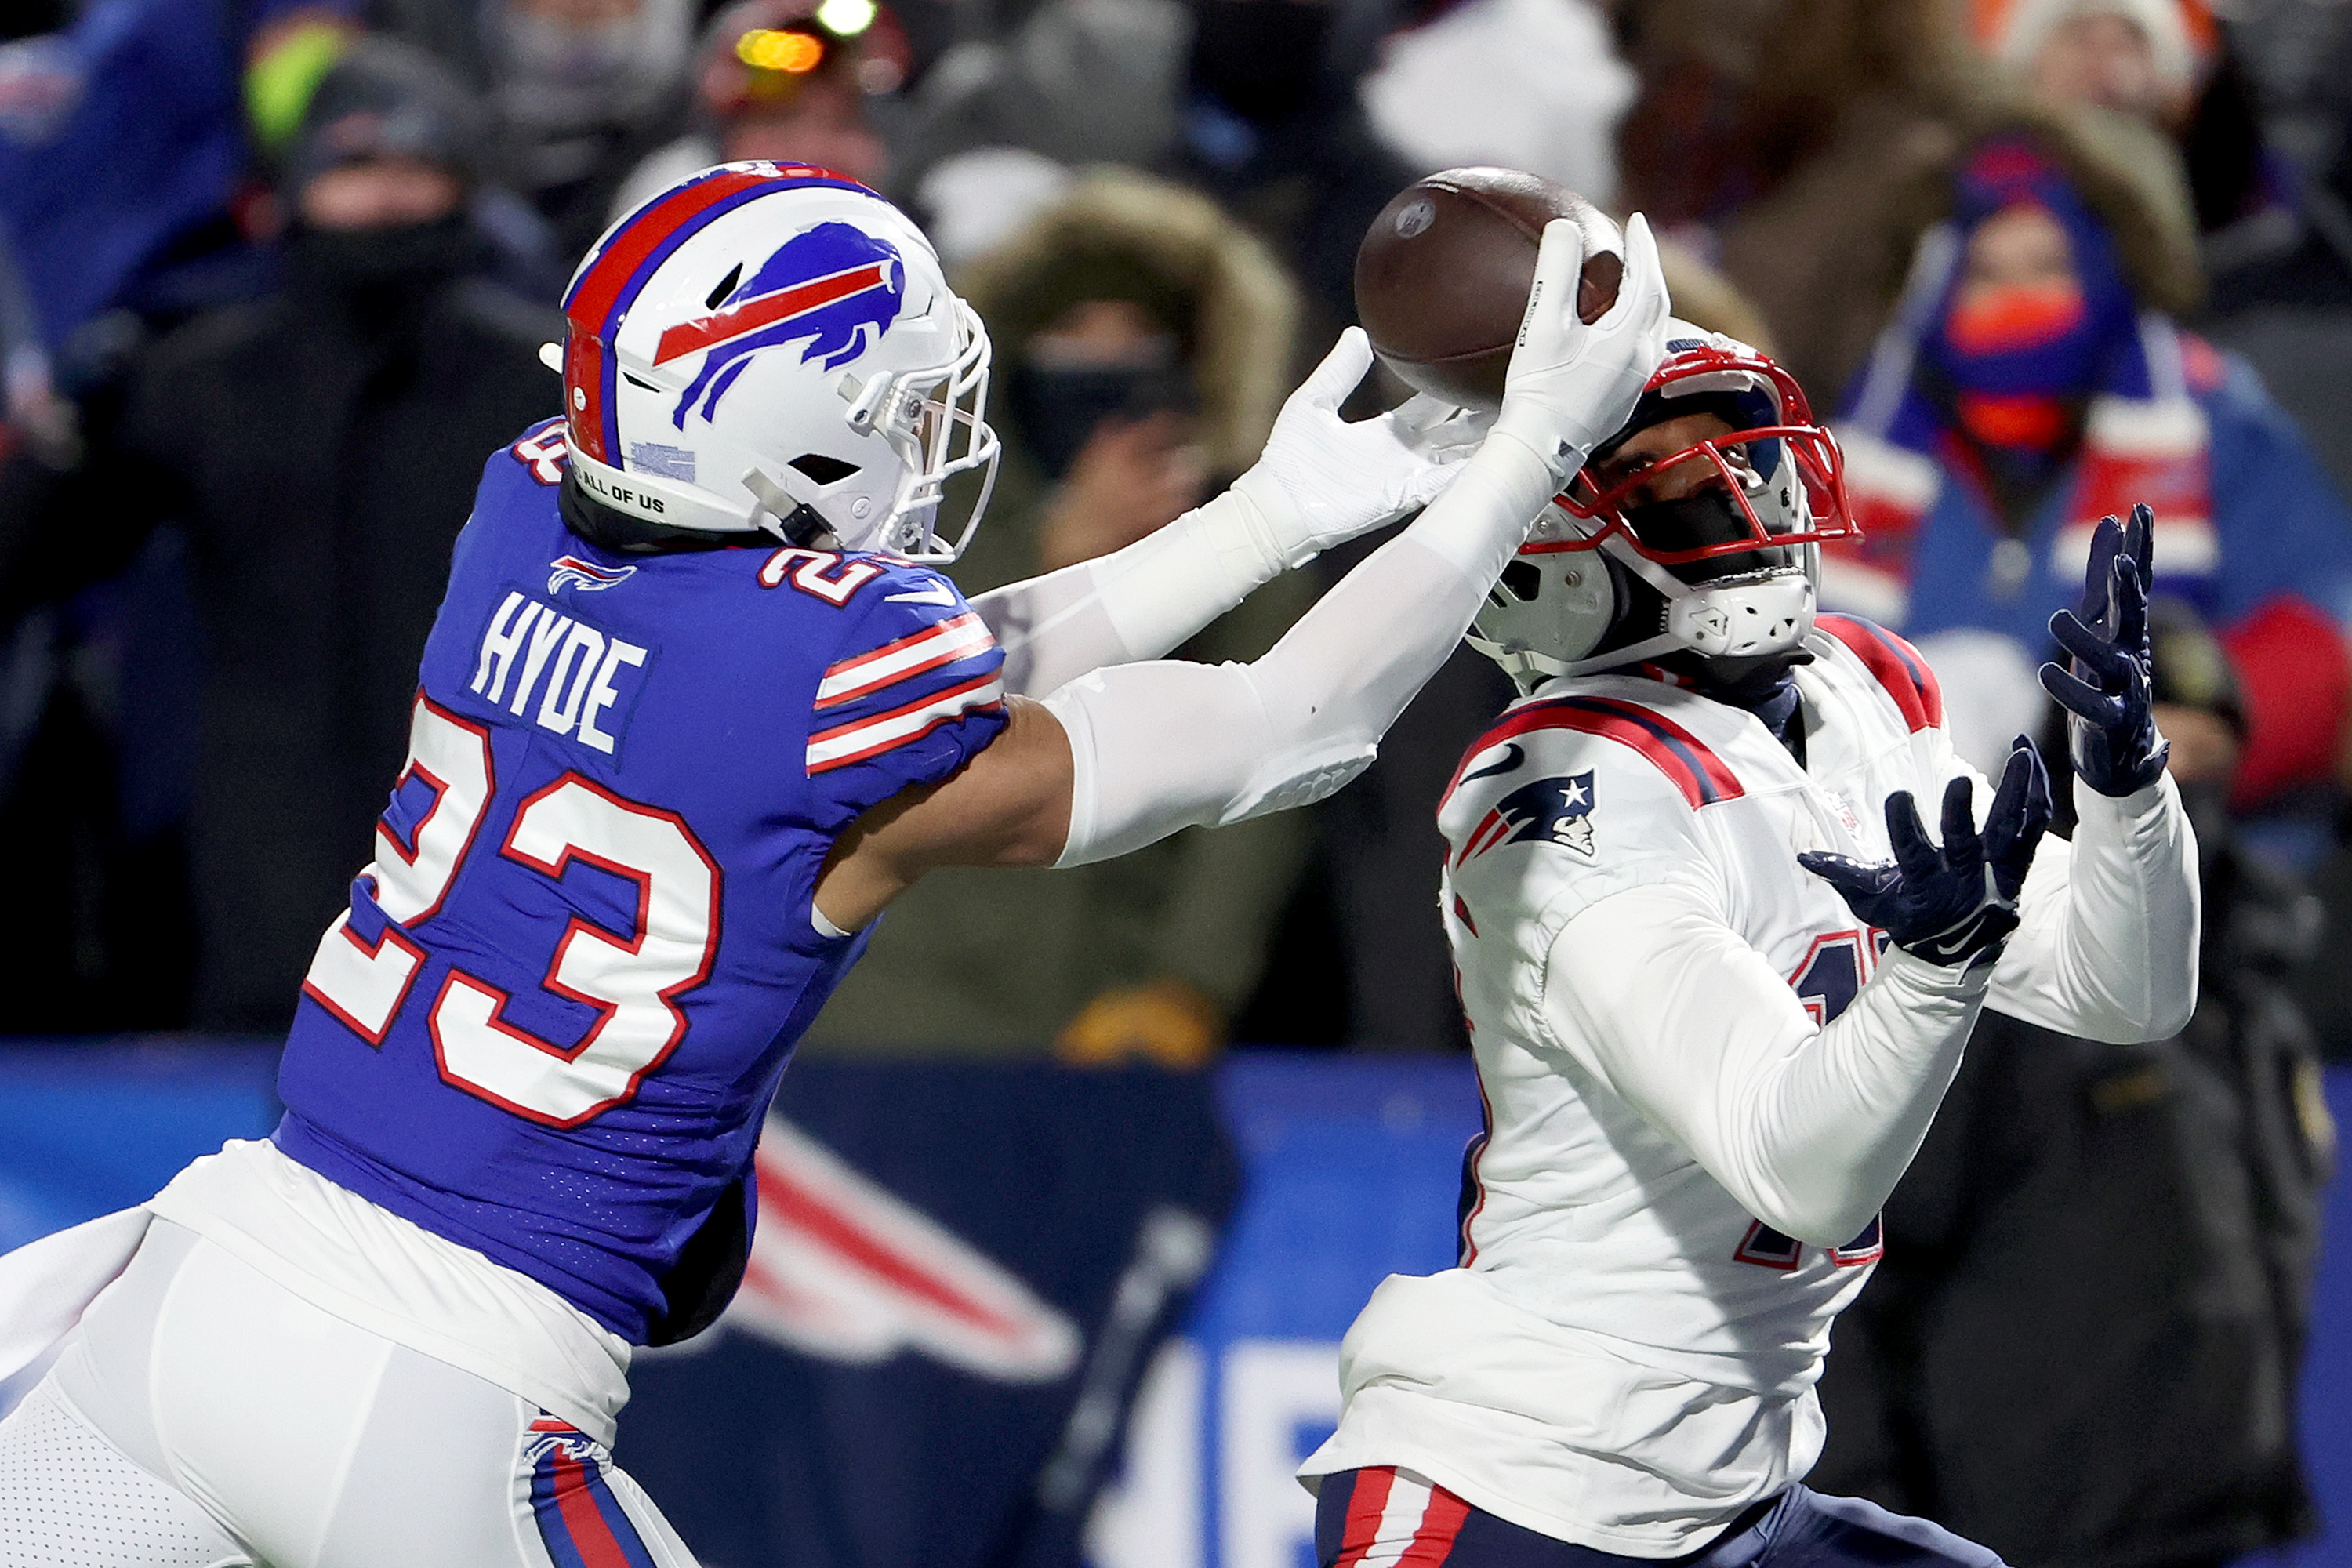 Micah Hyde #23 of the Buffalo Bills intercepts a pass intended for Nelson Agholor #15 of the New England Patriots during the first quarter in the AFC Wild Card playoff game at Highmark Stadium on January 15, 2022 in Buffalo, New York.